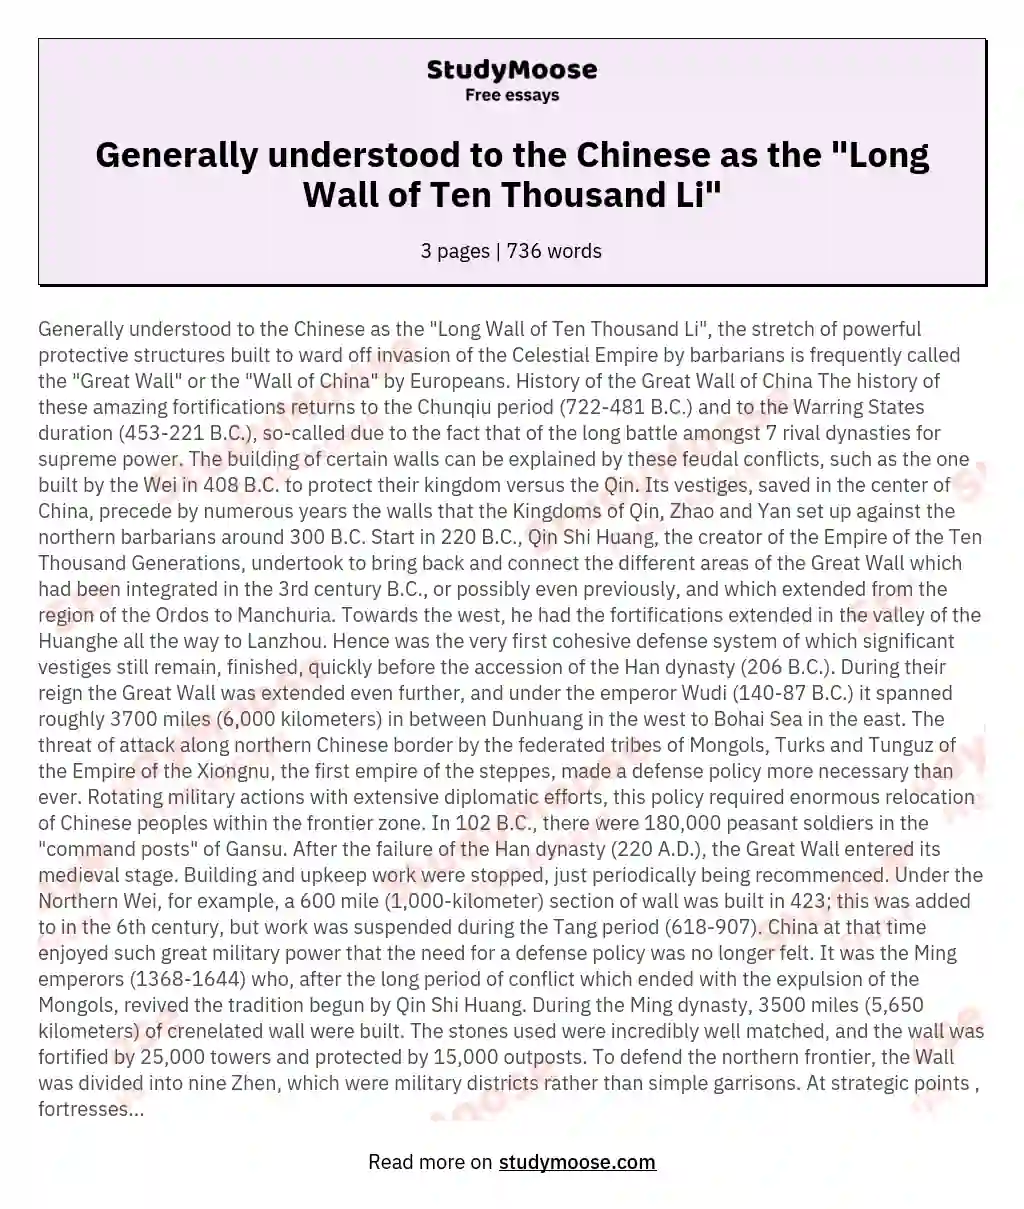 Generally understood to the Chinese as the "Long Wall of Ten Thousand Li"